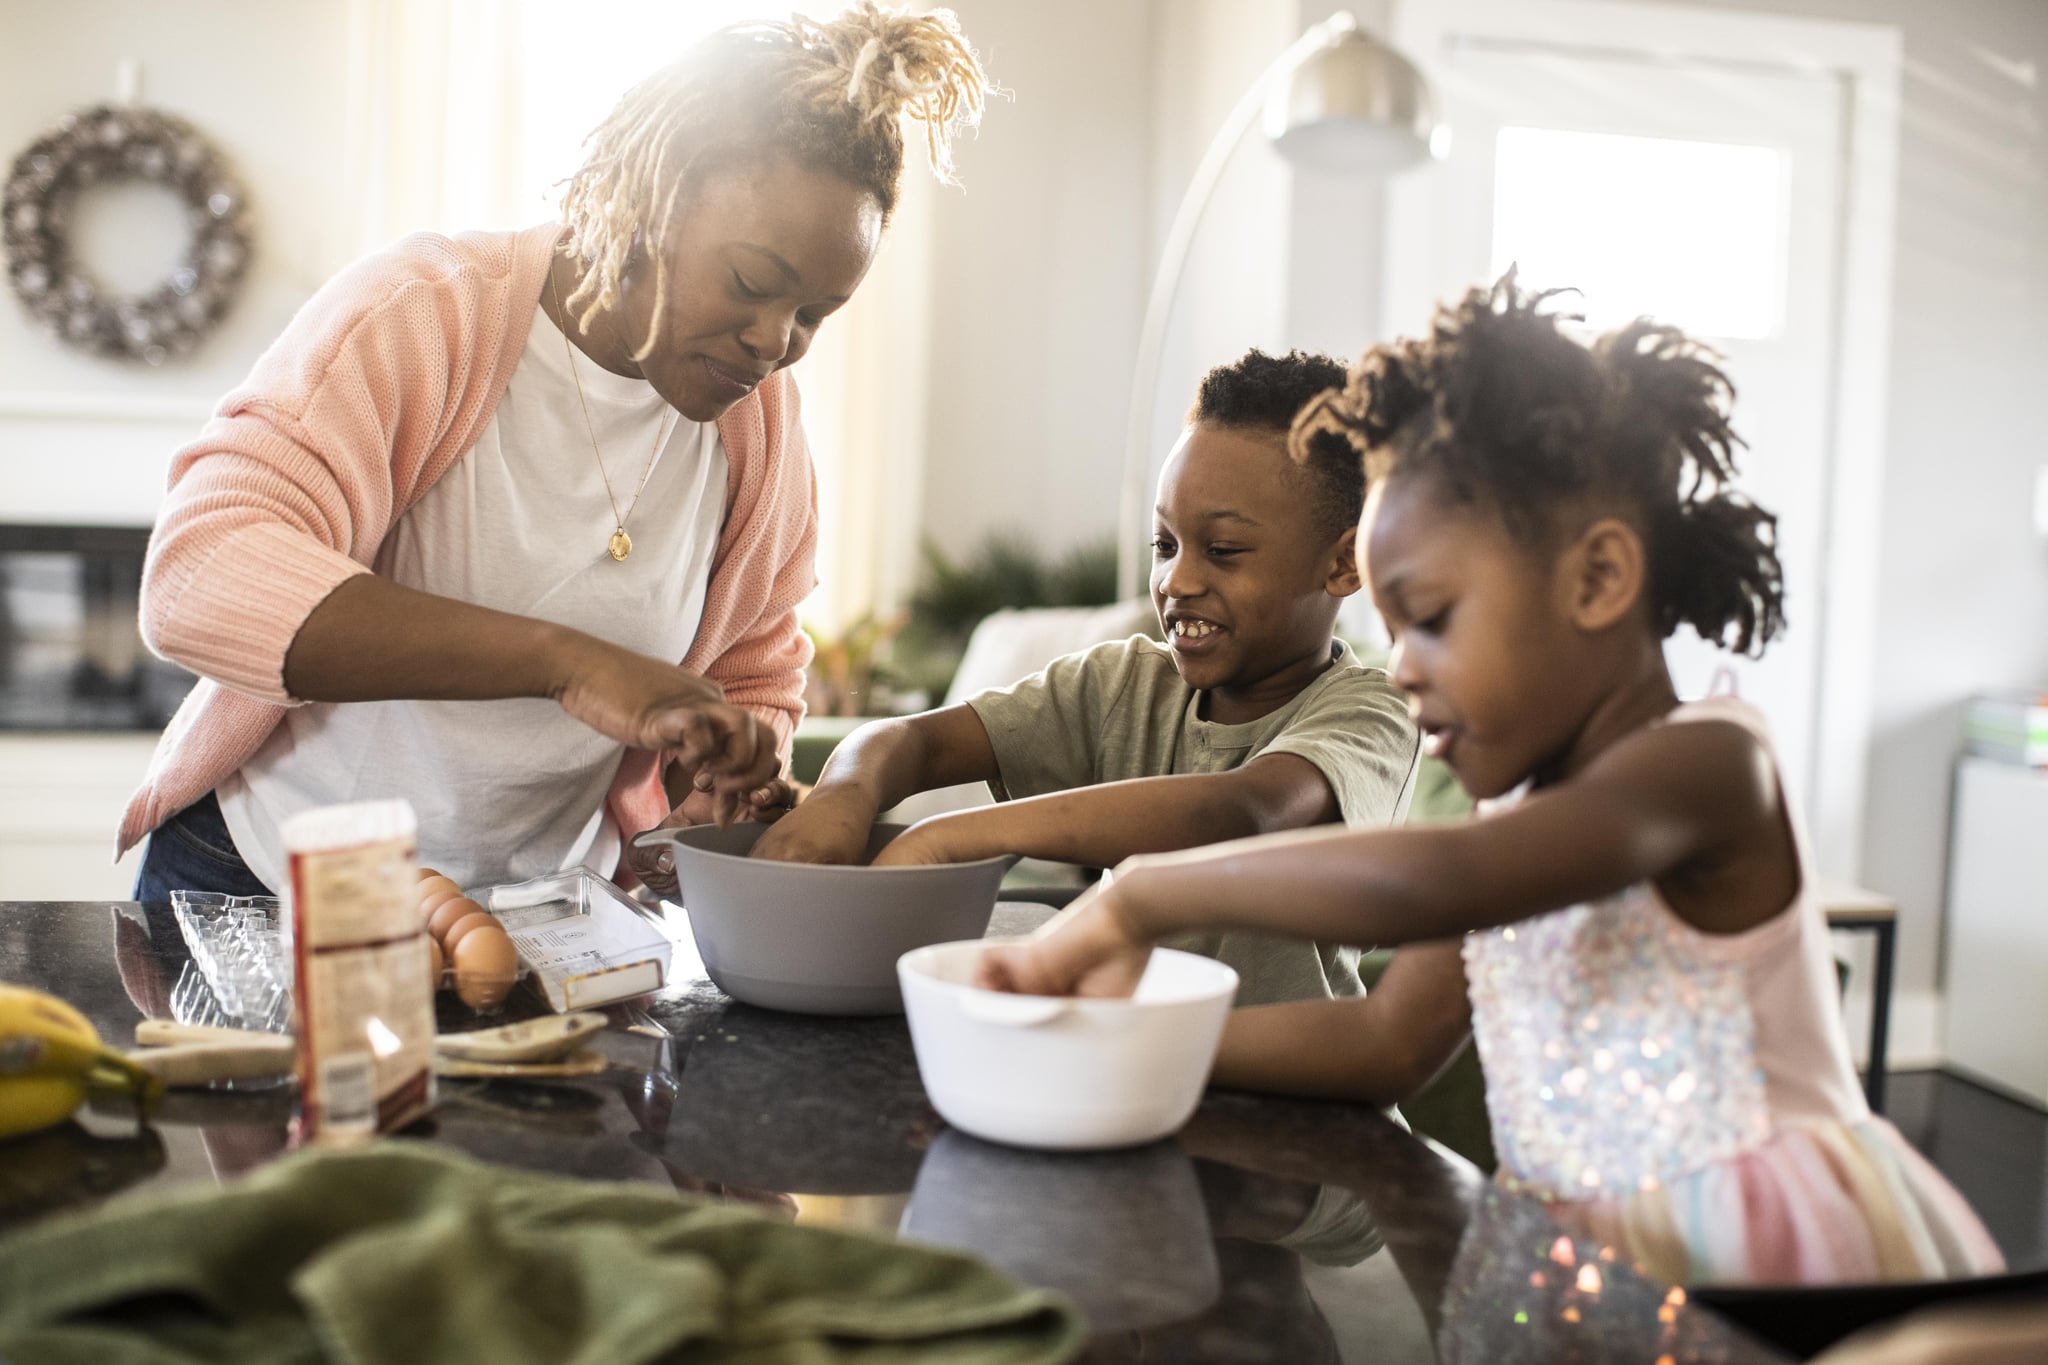 <p>Ready to bake a cake as fast as you can? On second thought, what's the rush on a blustery day when you have nowhere to go? Choose a <a href="https://www.popsugar.com/family/kid-friendly-baking-recipes-47417812" class="ga-track">family-friendly recipe</a> for bread, cake, cookies, or whatever your cravings call for, and make a warm baked good that hits directly on the coldest of days. Even tiny tykes can help with small tasks that feel like big deals to them, like pouring pre-measured ingredients into a mixture. </p>